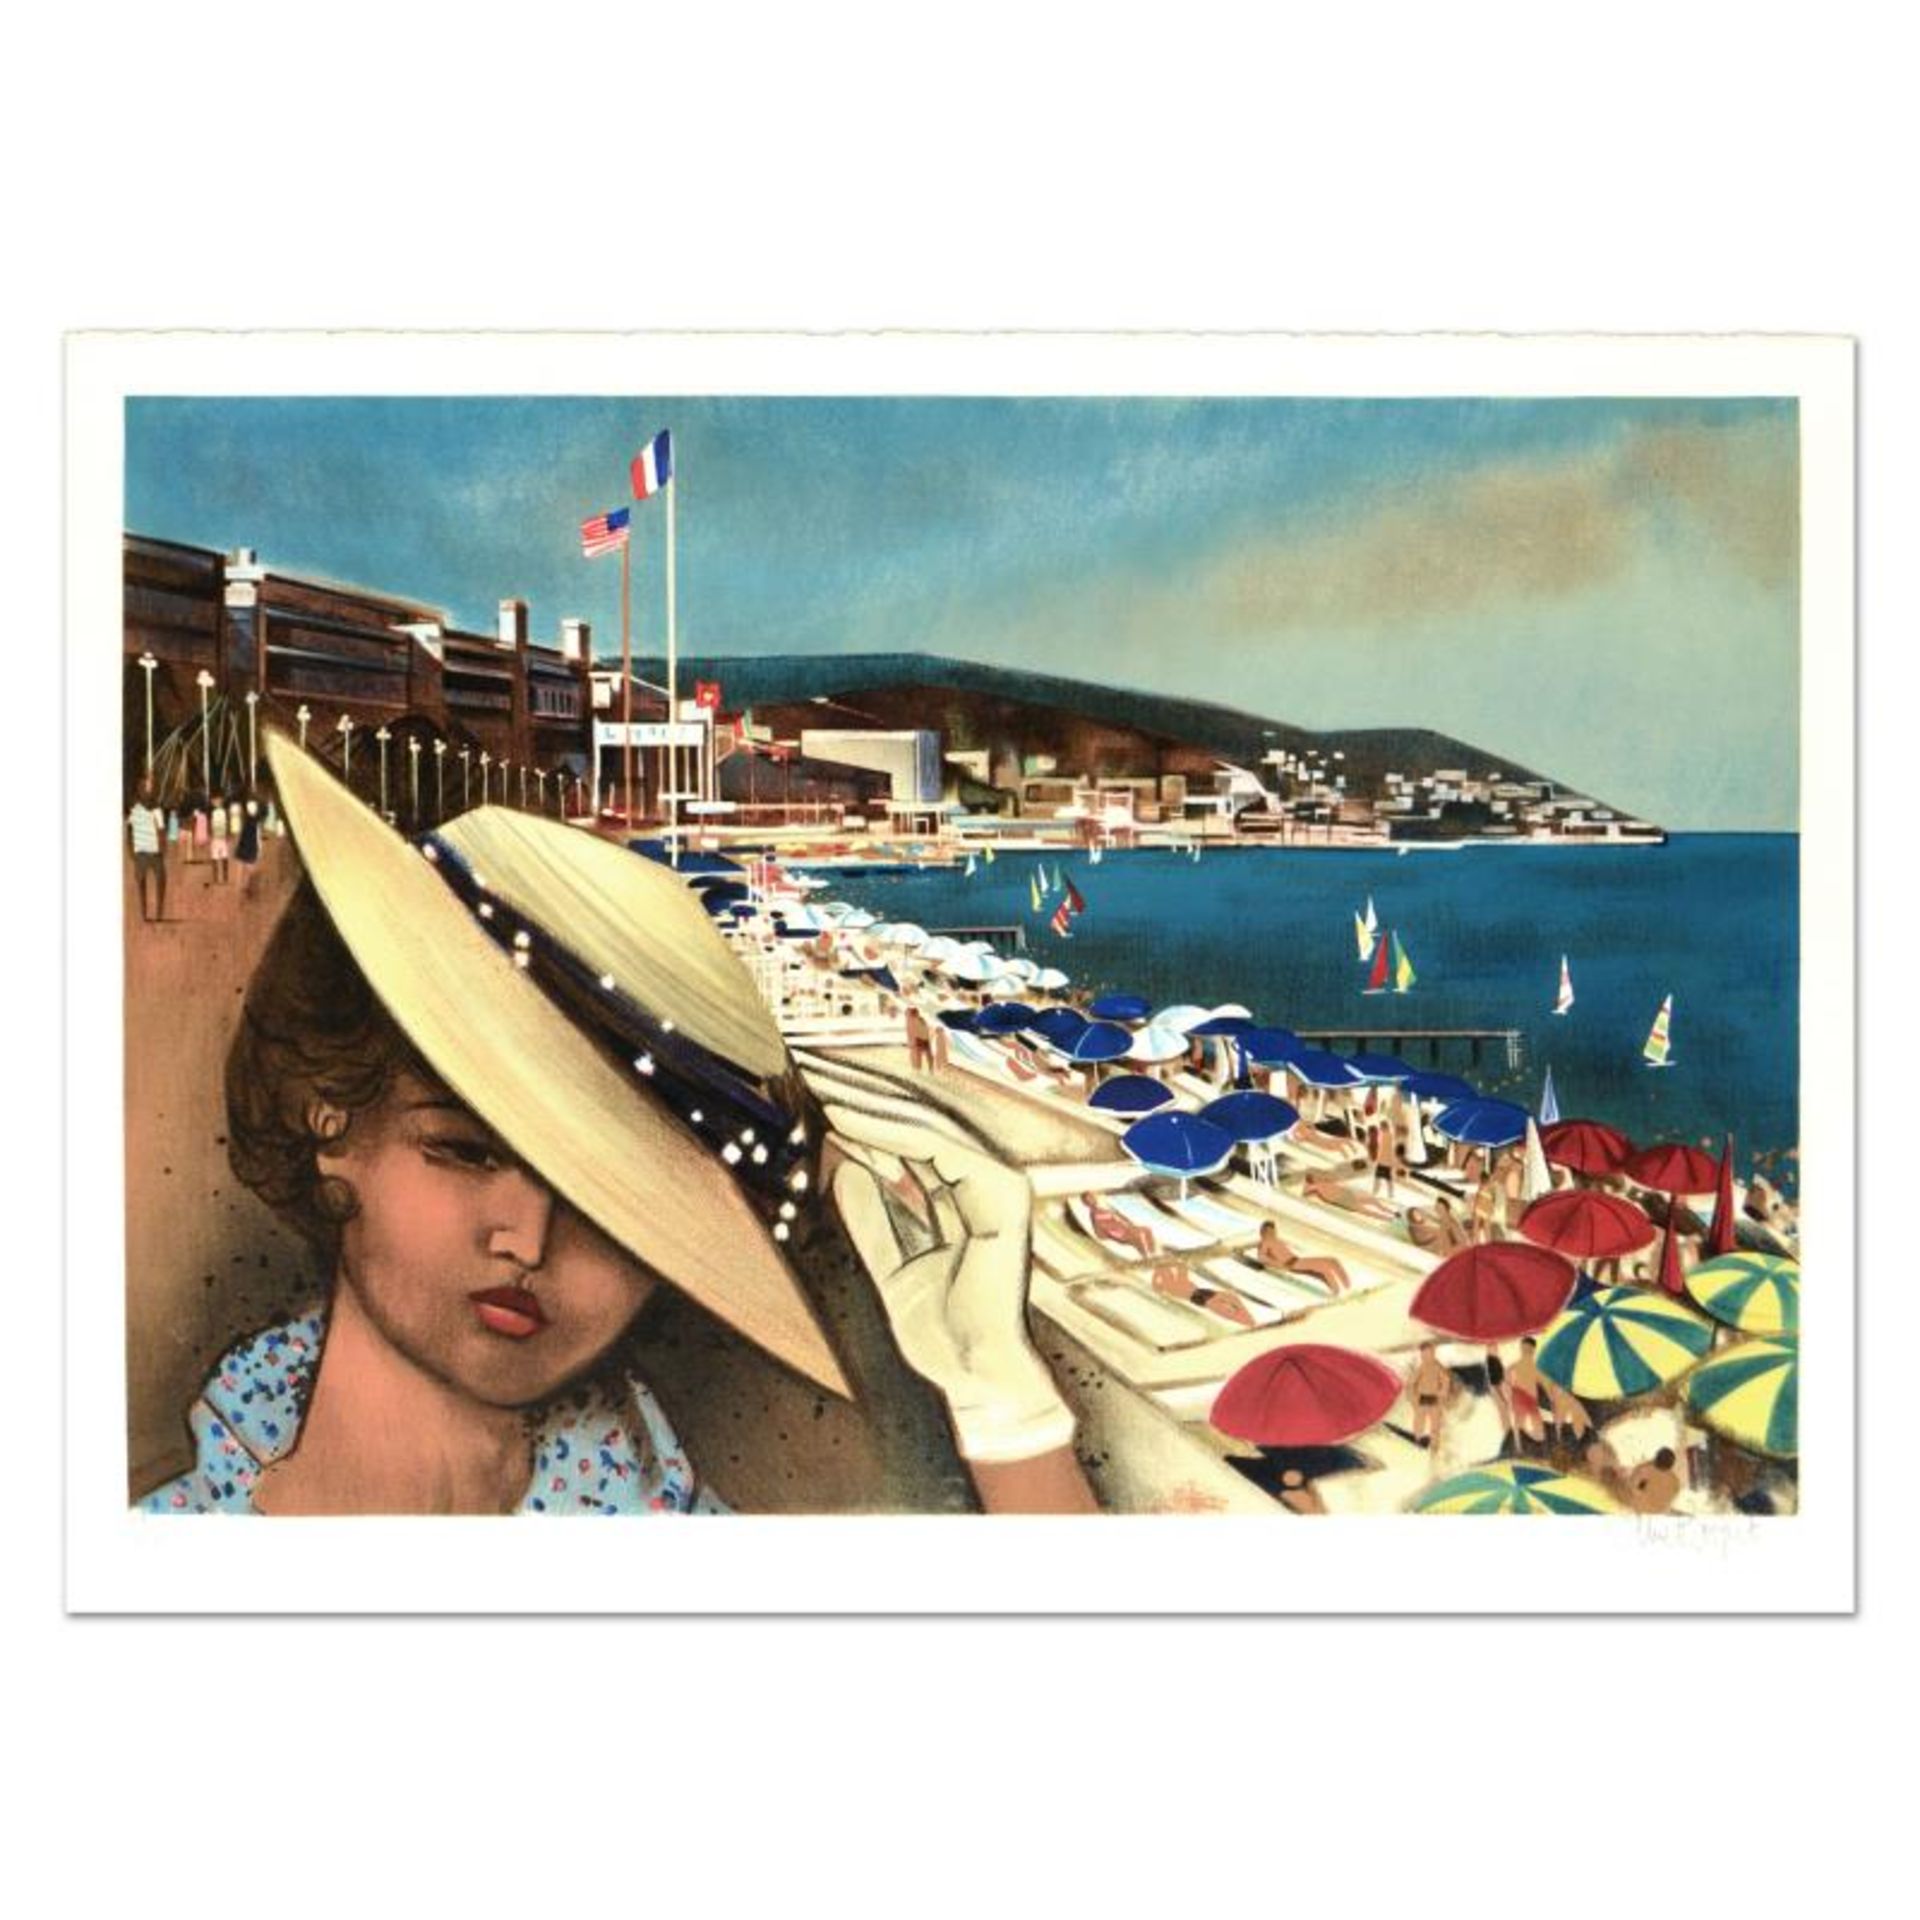 Robert Vernet Bonfort, "Cannes" Limited Edition Lithograph, Numbered and Hand Si